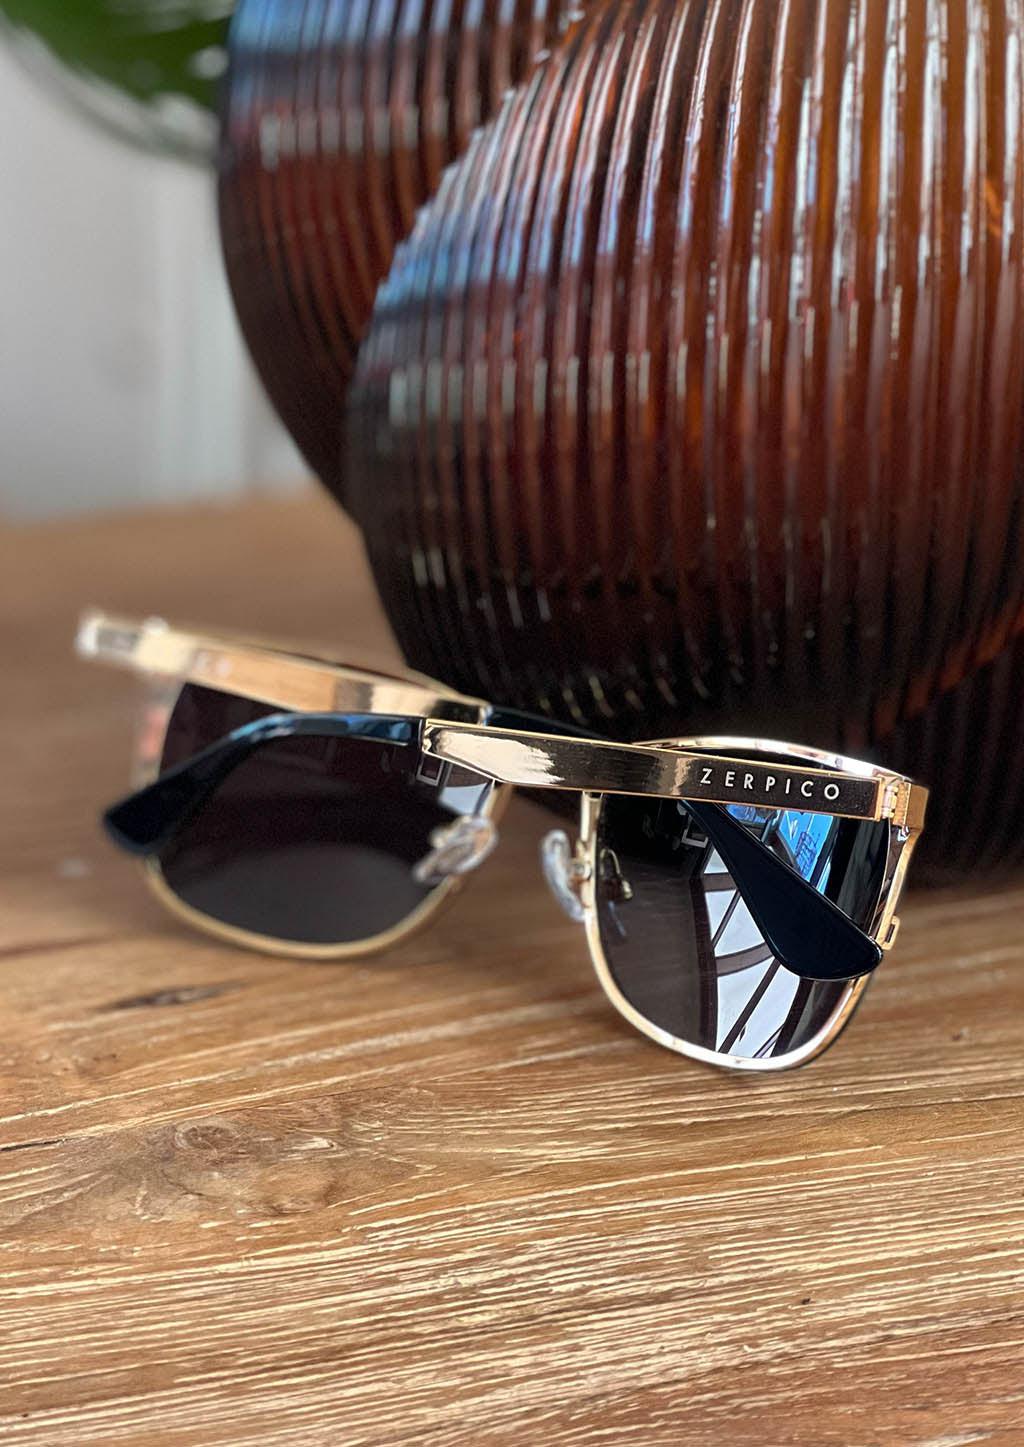 Titan - Titanium Wayfarer Sunglasses V2 - 24K Gold Plated with real gold. Detail photo showing the gold.